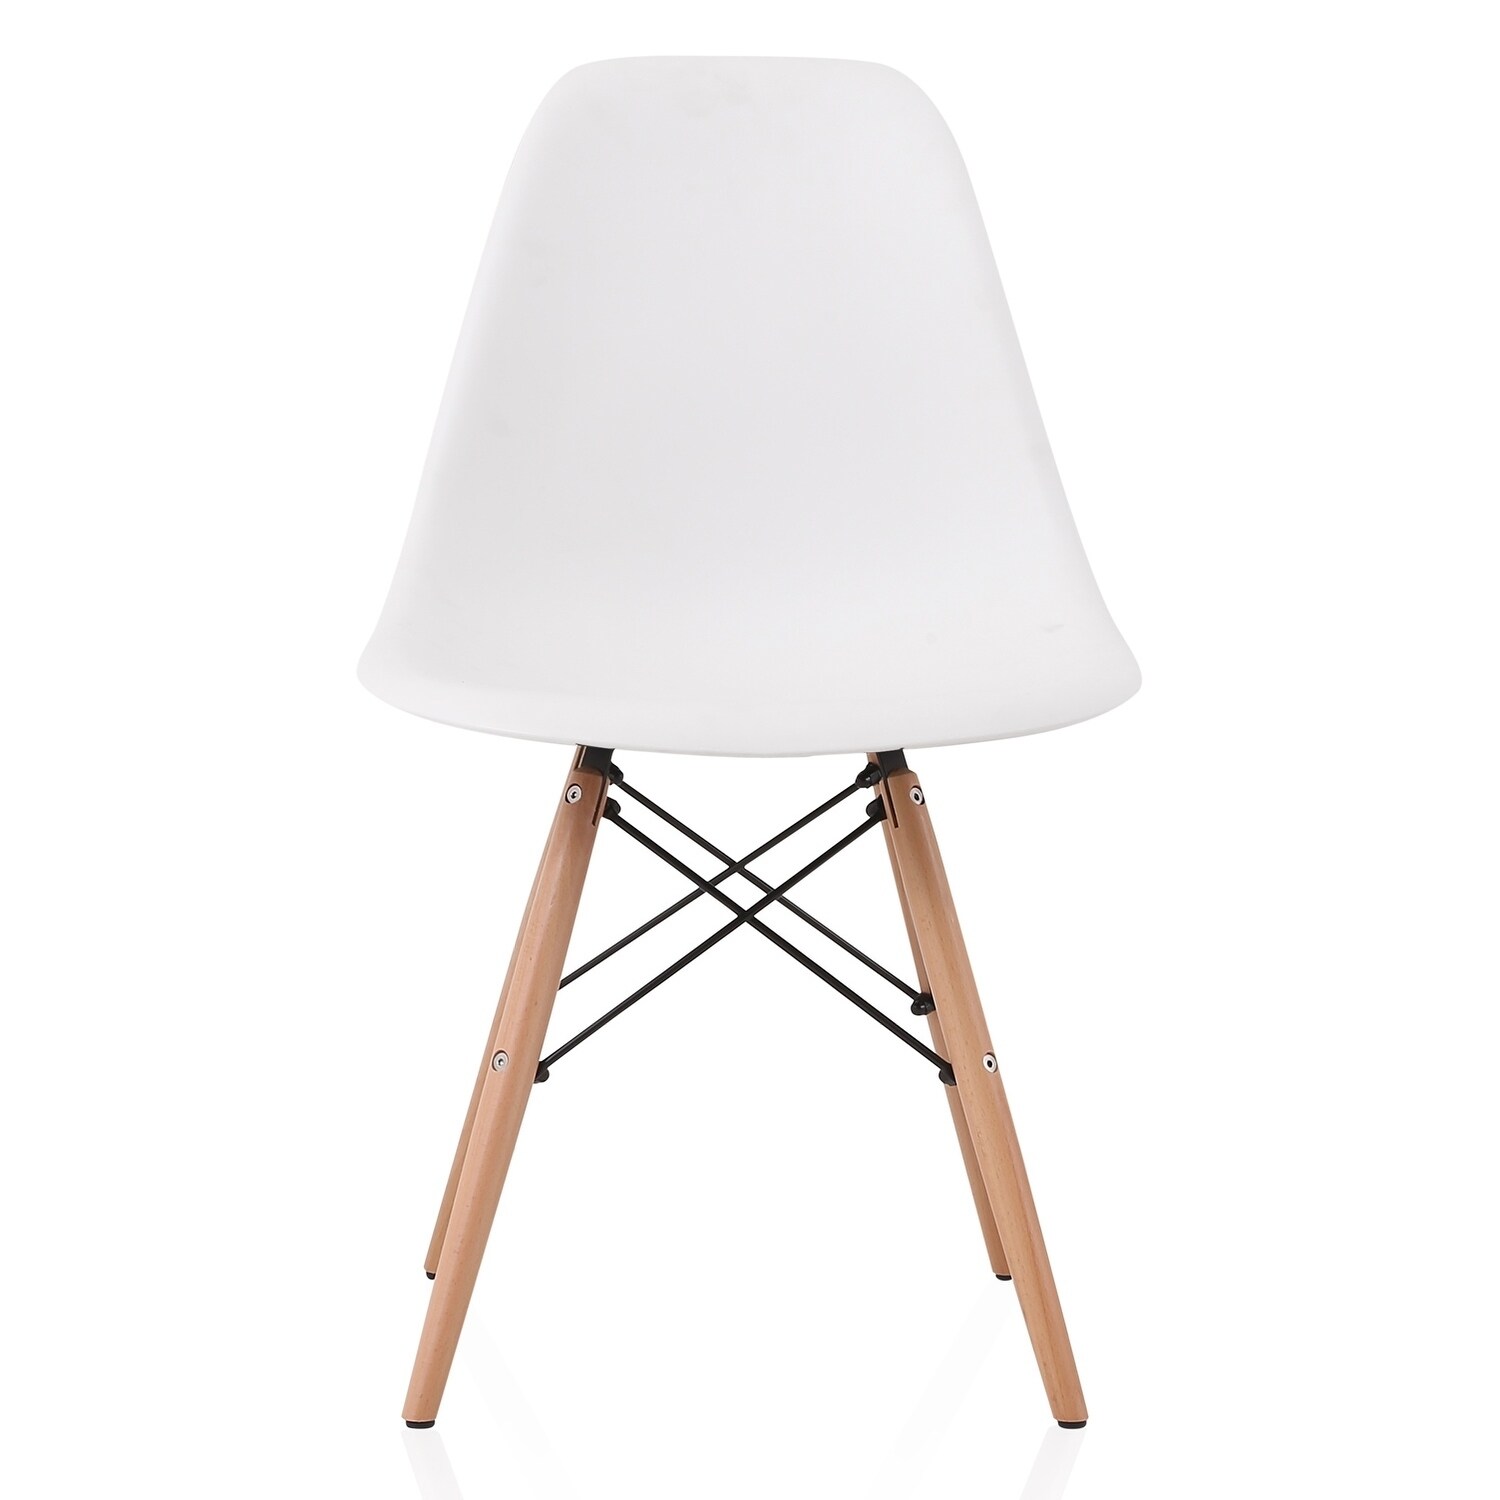 https://ak1.ostkcdn.com/images/products/18024570/CozyBlock-Set-of-4-Molded-White-Plastic-Dining-Shell-Chair-with-Beech-Wood-Eiffel-Legs-9a1dc658-9594-4f10-92d7-7bec04c56f61.jpg